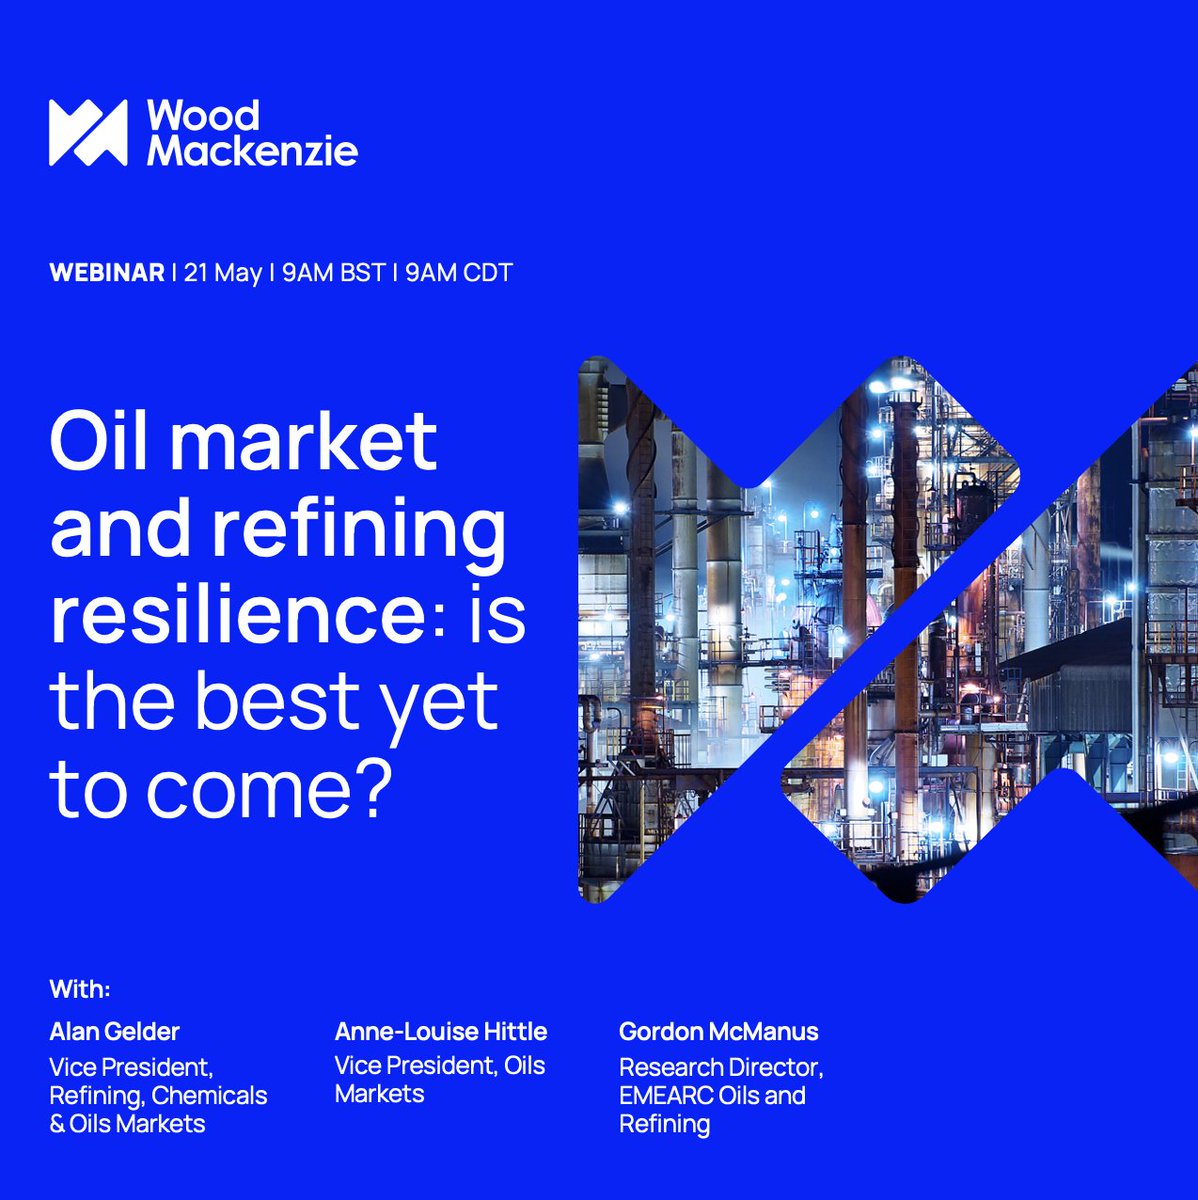 Join us on Tuesday 21 May for a live webinar where our experts will discuss the crucial role #oil prices will play to support supply growth and #refining capacity and margins. Register today to secure your spot! okt.to/kCv9V0